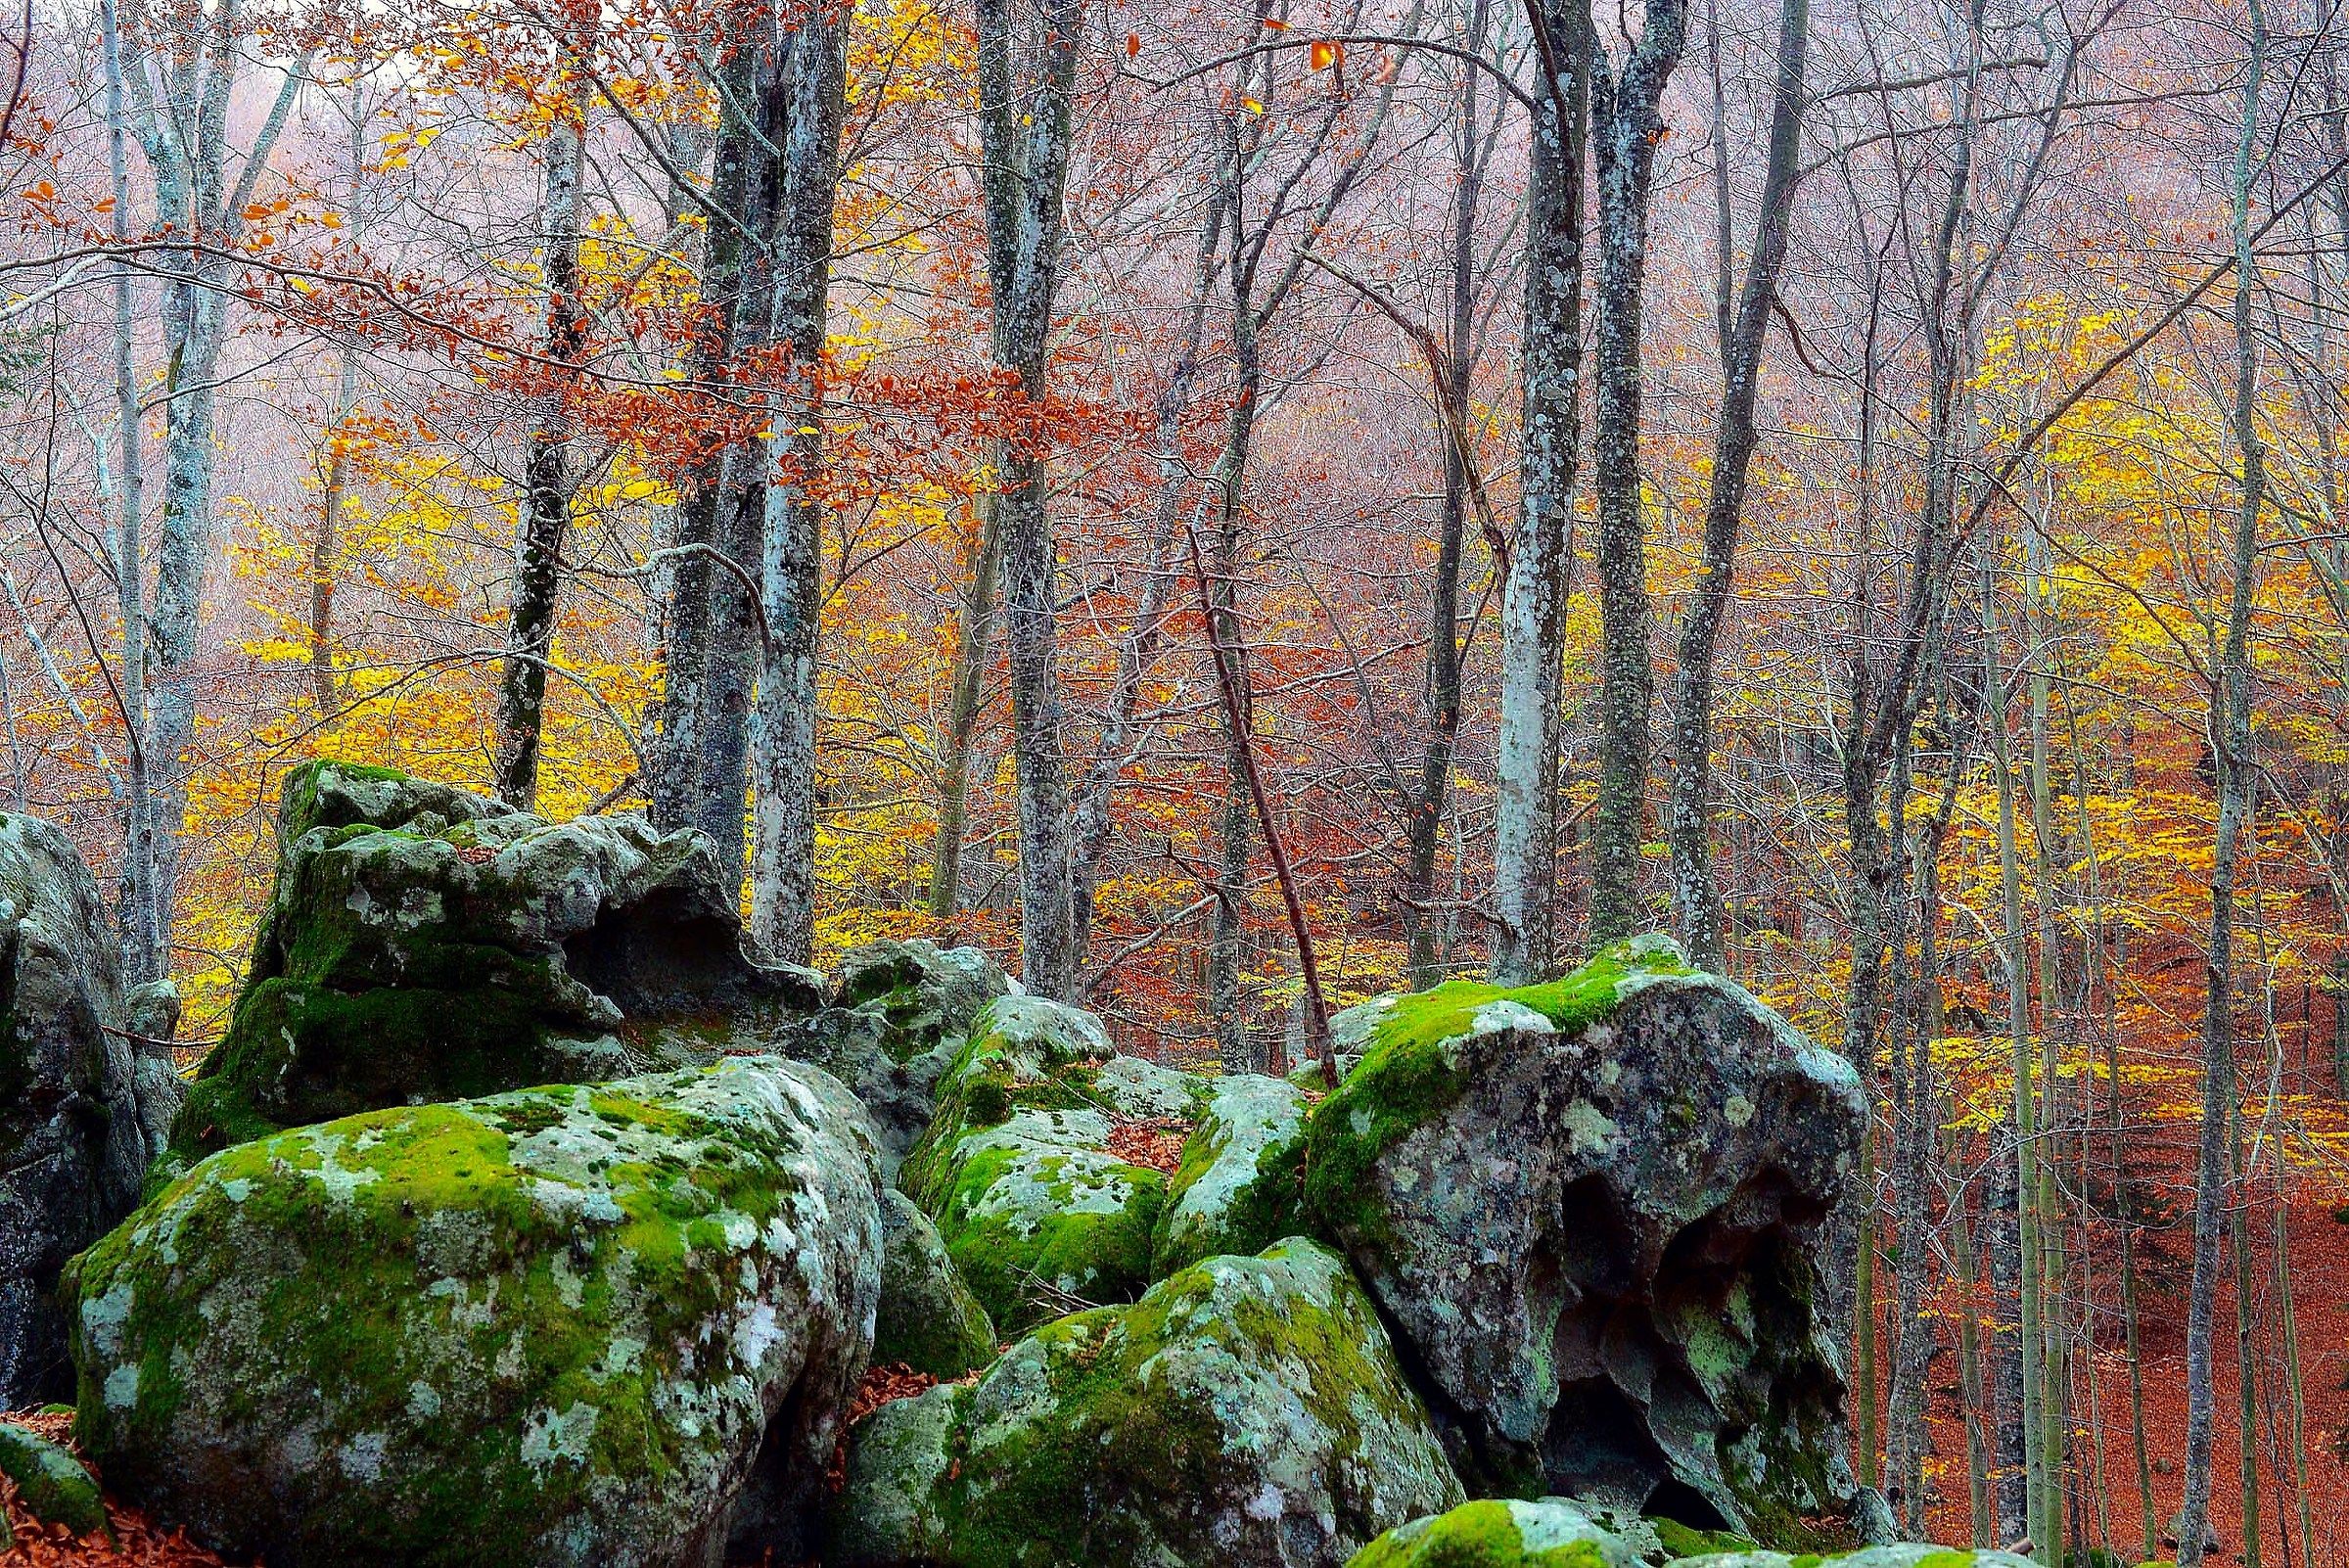 The Beech forest in autumn on Mount Amiata...